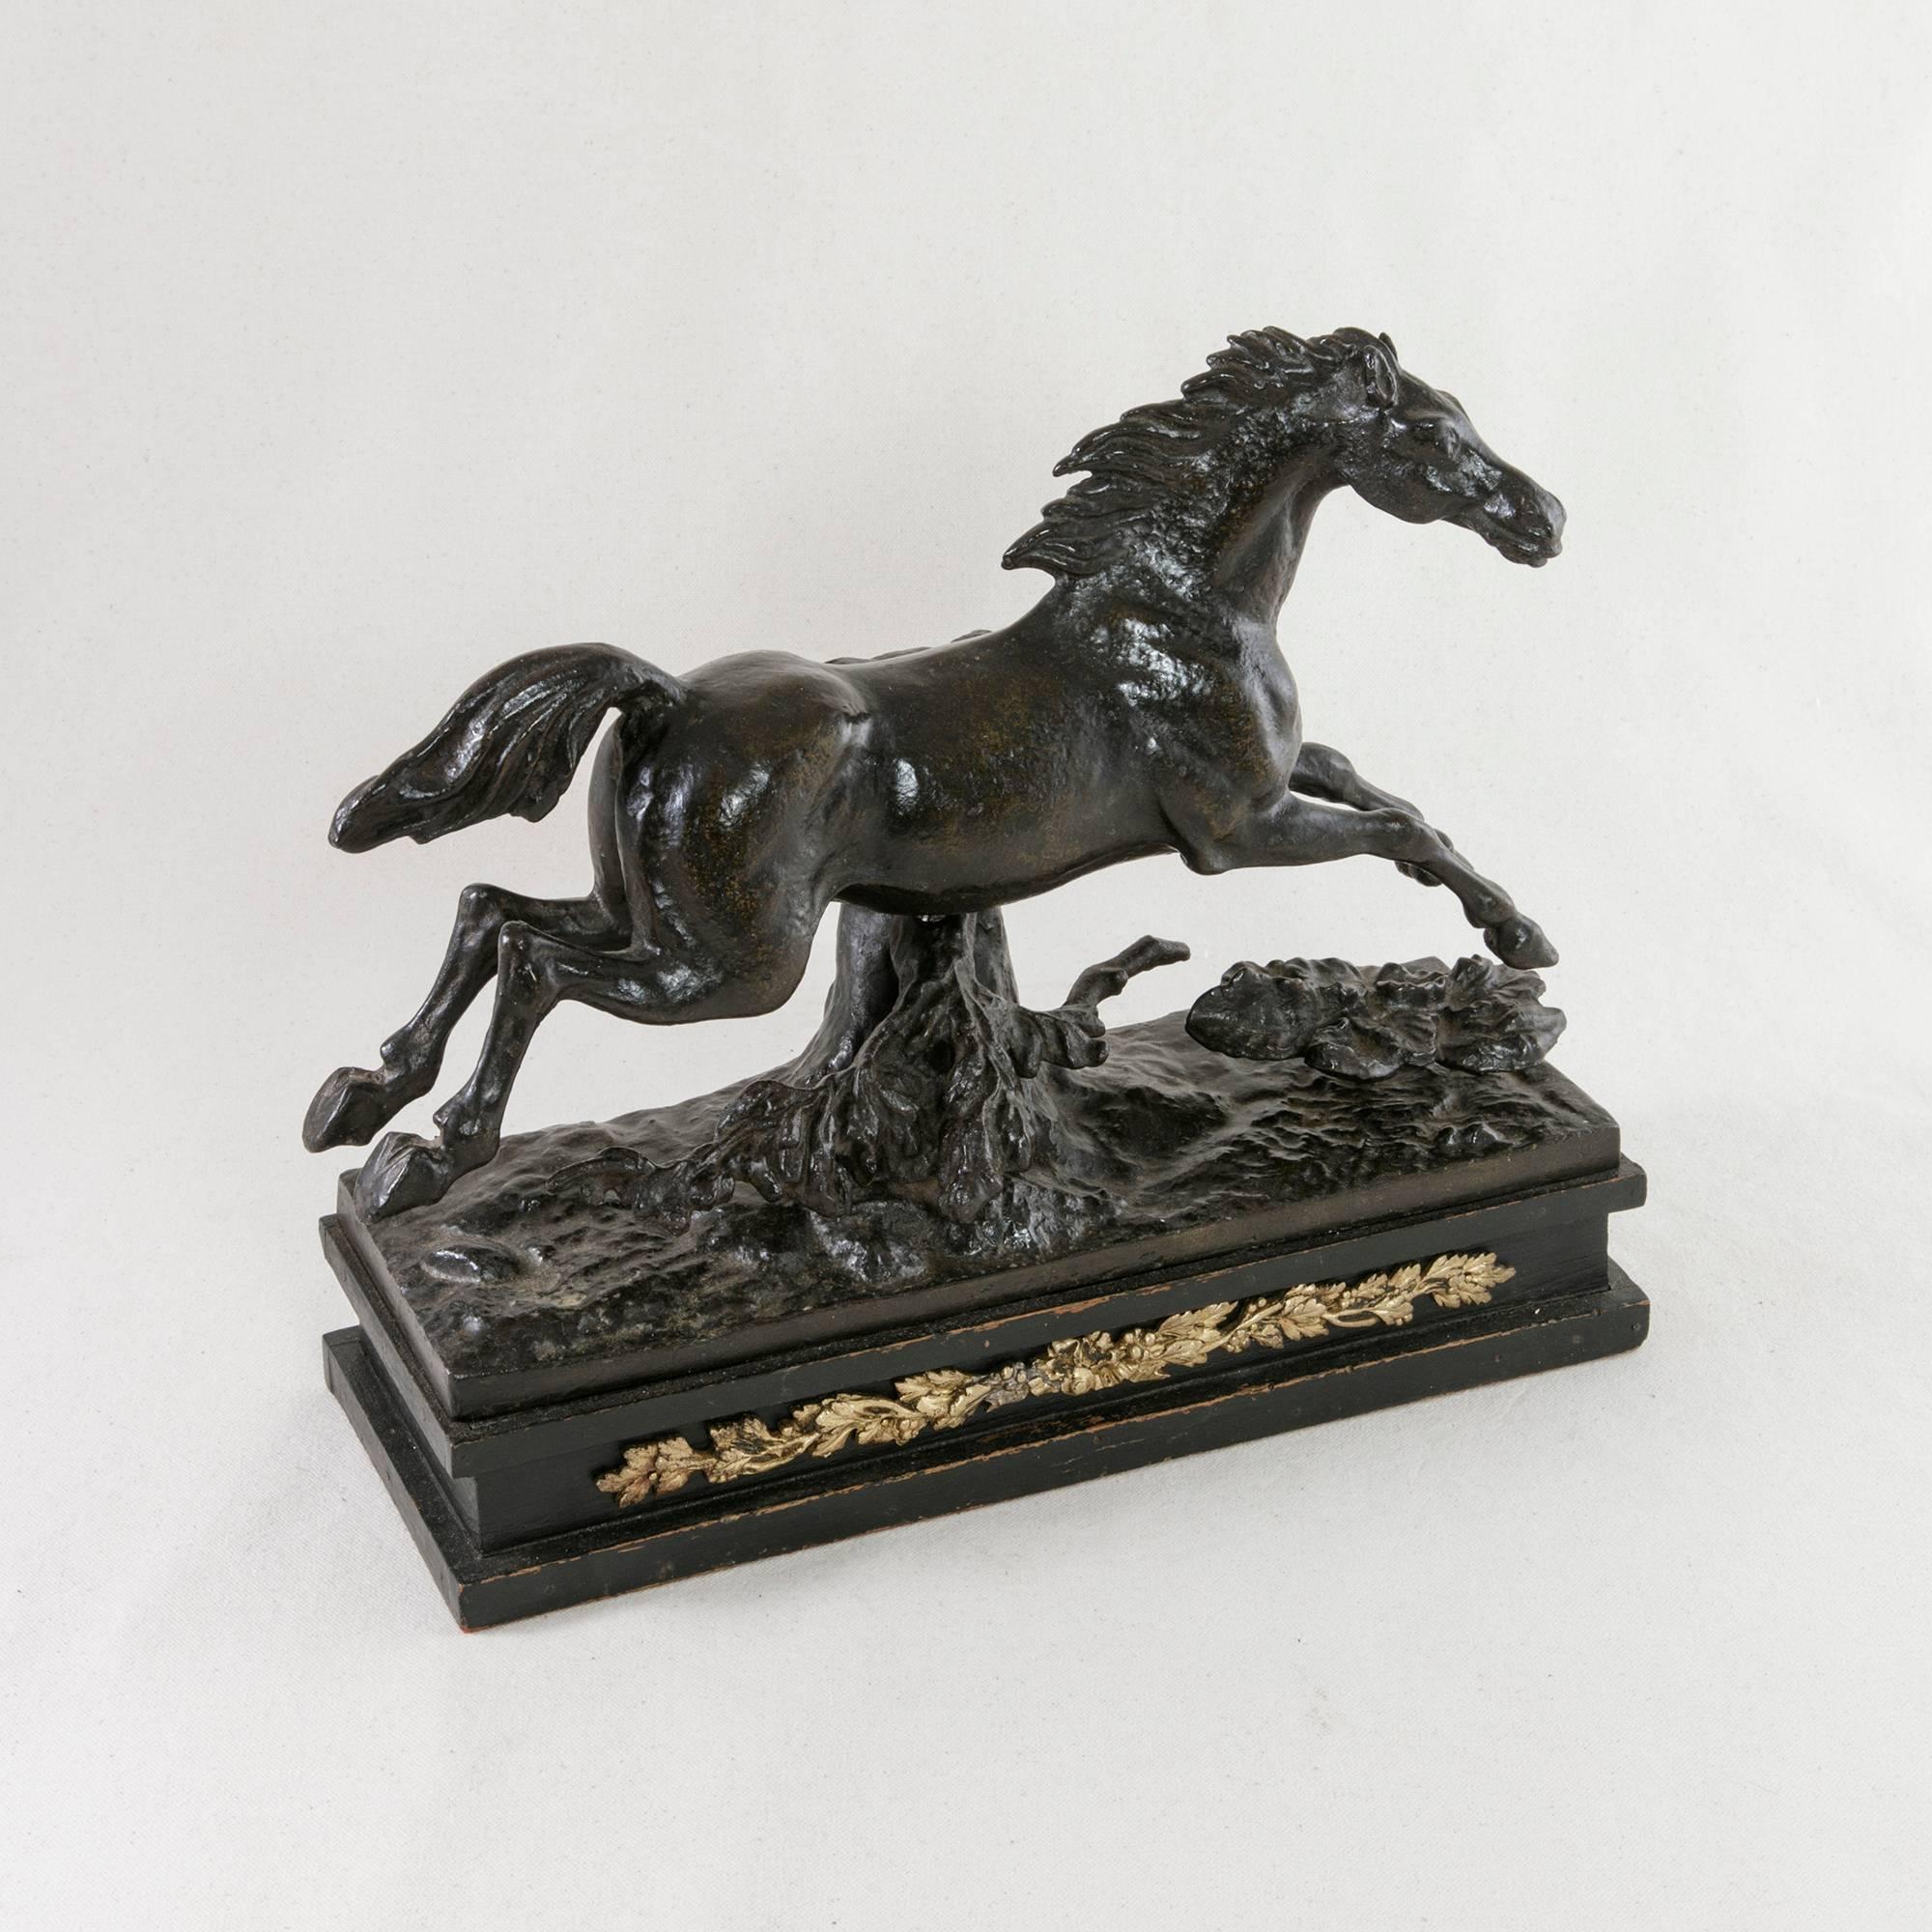 This Napoleon III period cast iron sculpture features a galloping horse near a tree stump surrounded by foliage. It is mounted on a painted black wooden base embellished with a bronze frieze of a central ribbon and bow flanked by branches with